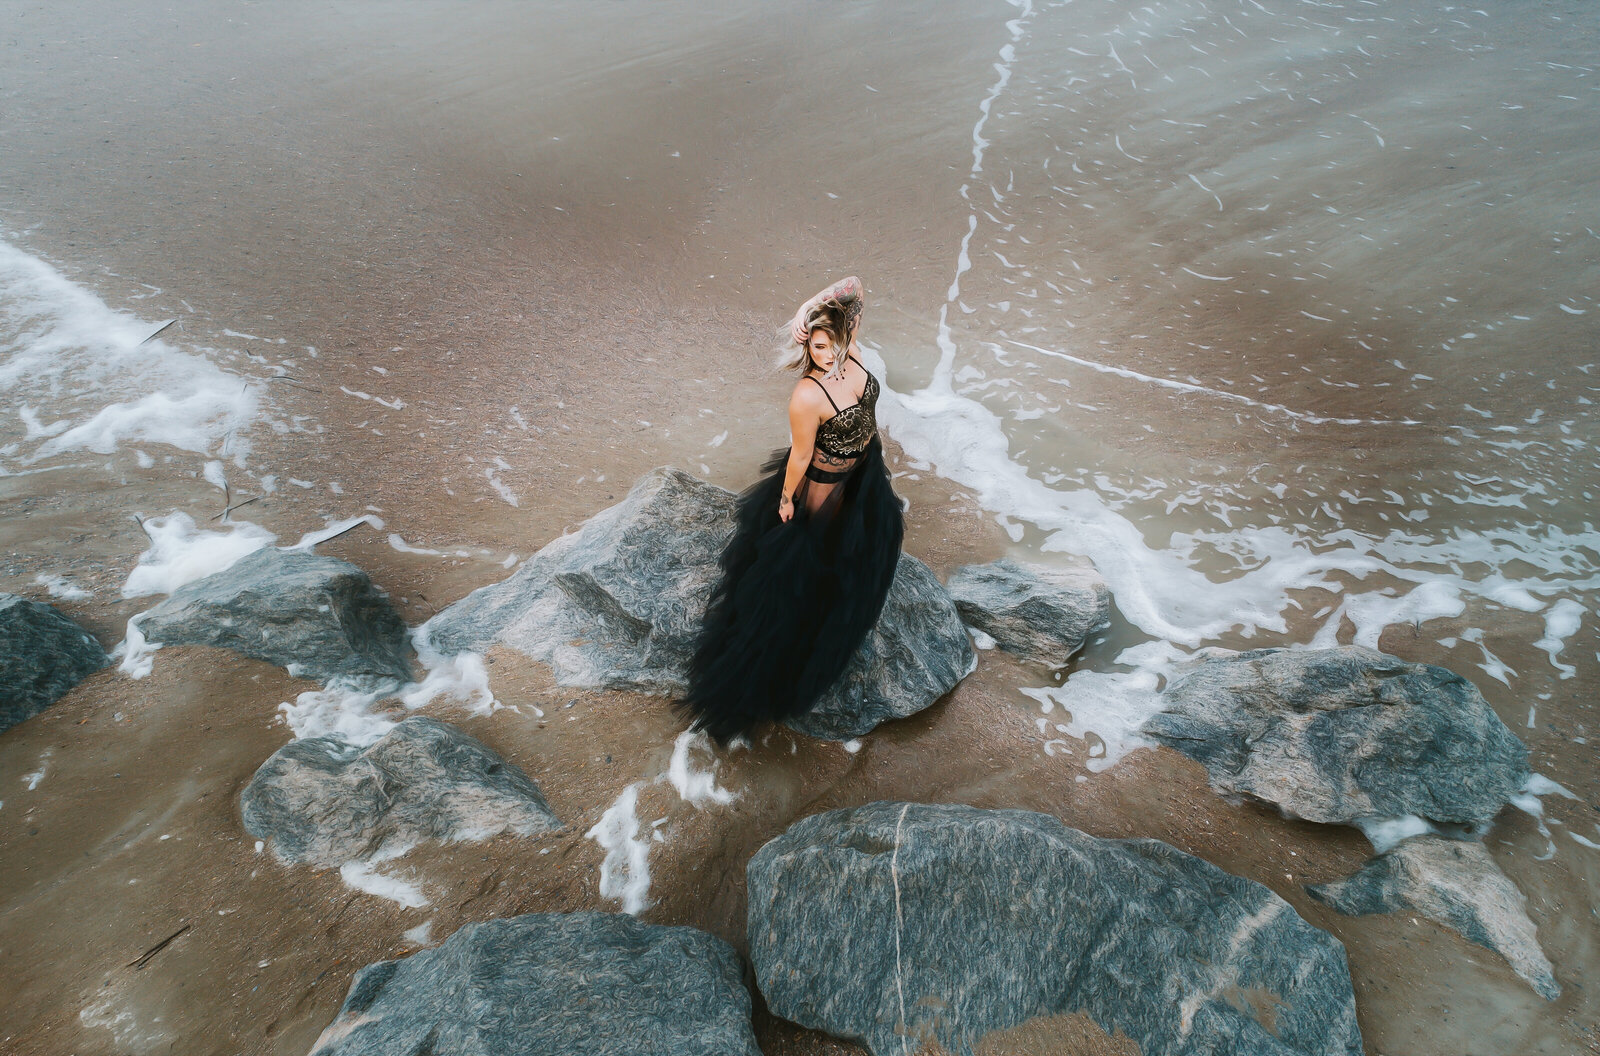 Aerial shot of woman on beach with black gown  standing on rocks